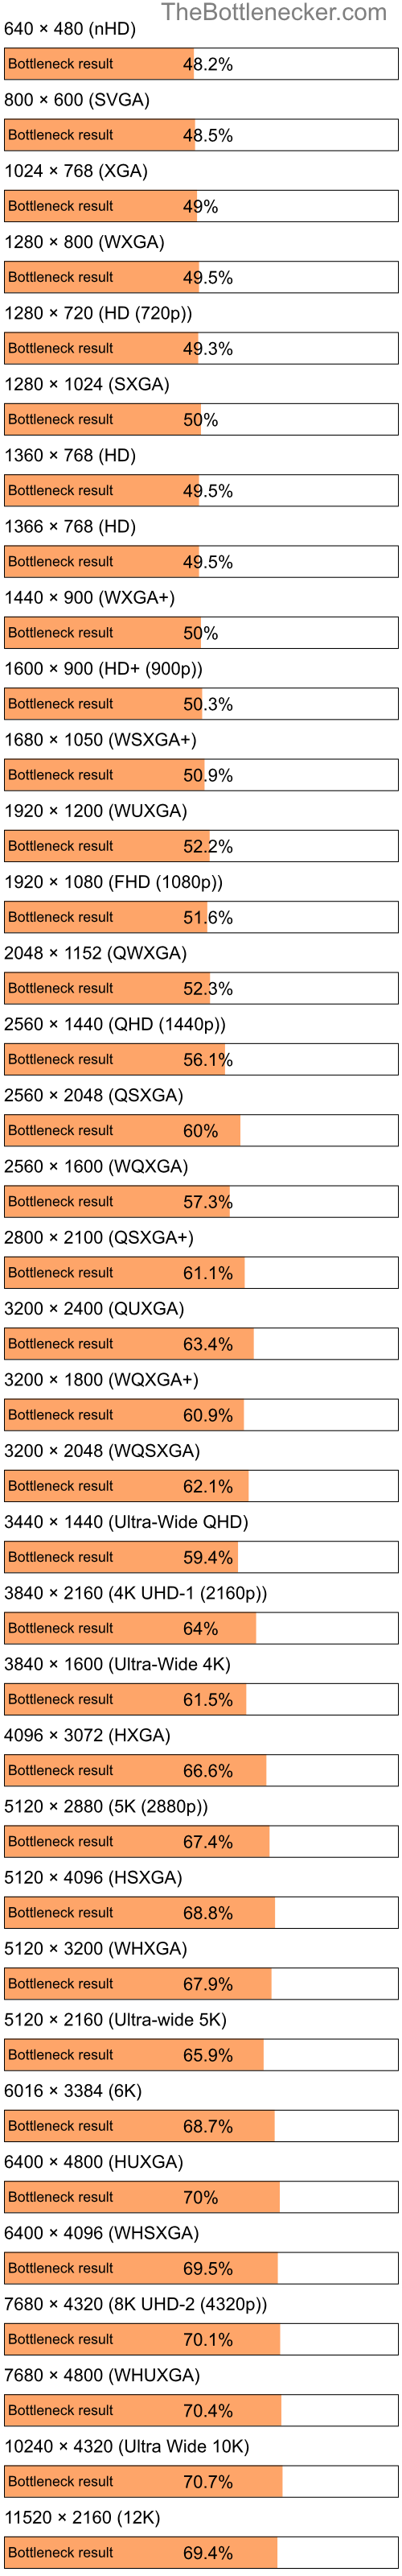 Bottleneck results by resolution for Intel Celeron and NVIDIA Quadro FX 4400 in Processor Intense Tasks